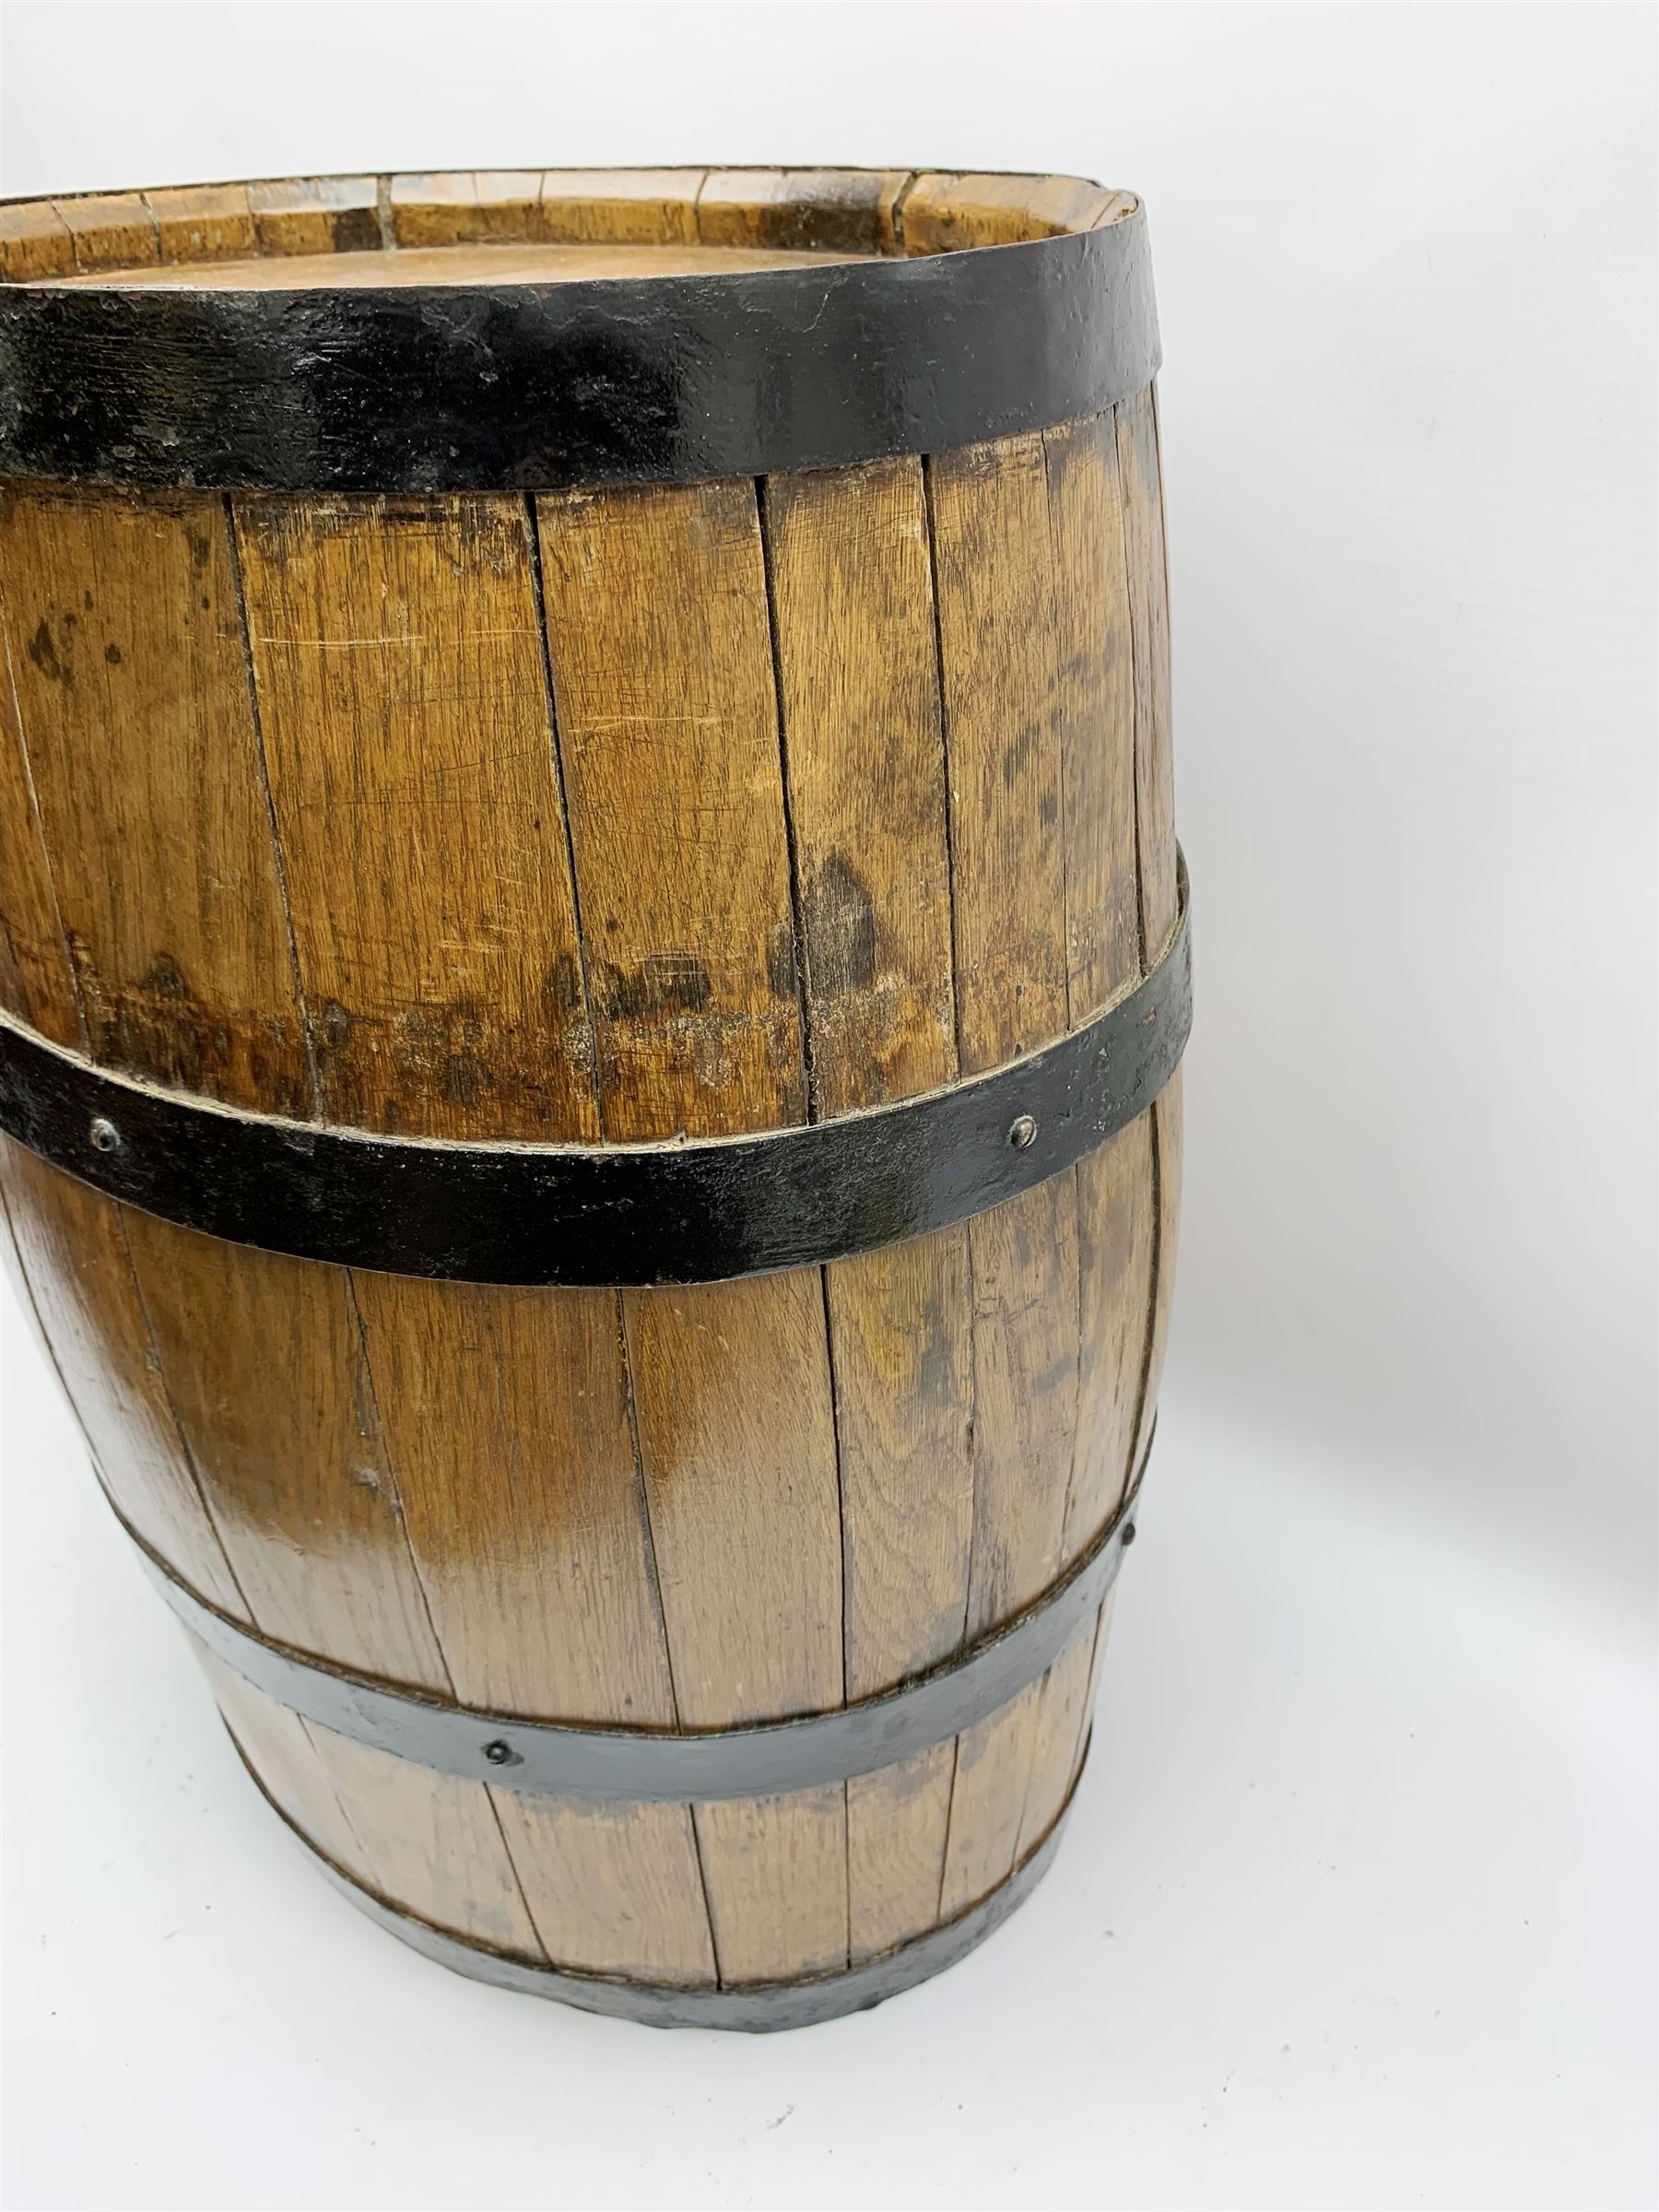 19th century oak and metal bound coopered barrel - Image 5 of 5